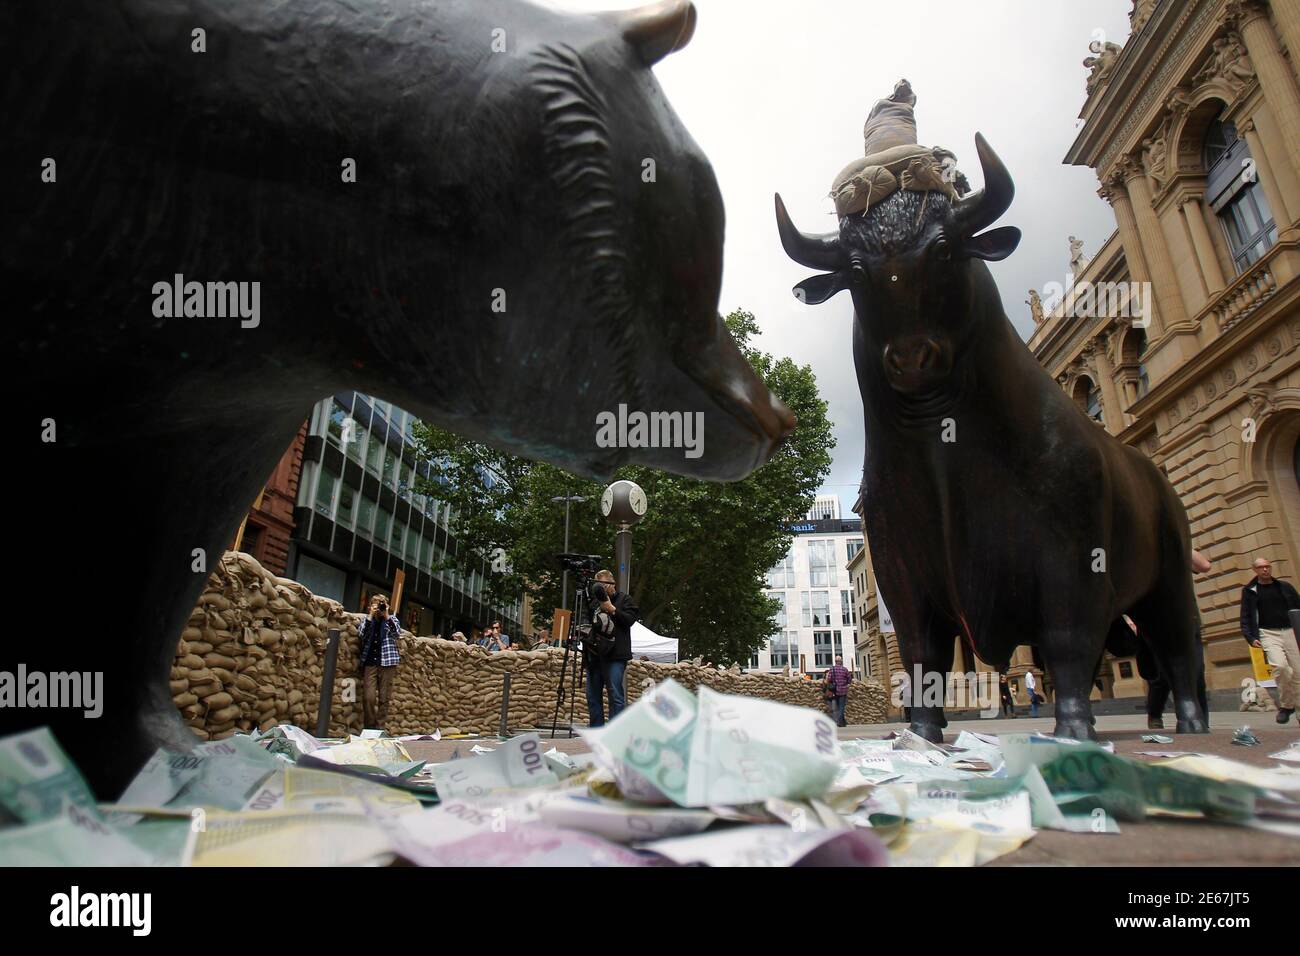 Bull and bear statues are surrounded by fake bank notes during a protest against financial speculations in front of Frankfurt's stock exchange June 17, 2012. REUTERS/Alex Domanski (GERMANY - Tags: BUSINESS CIVIL UNREST) Stock Photo